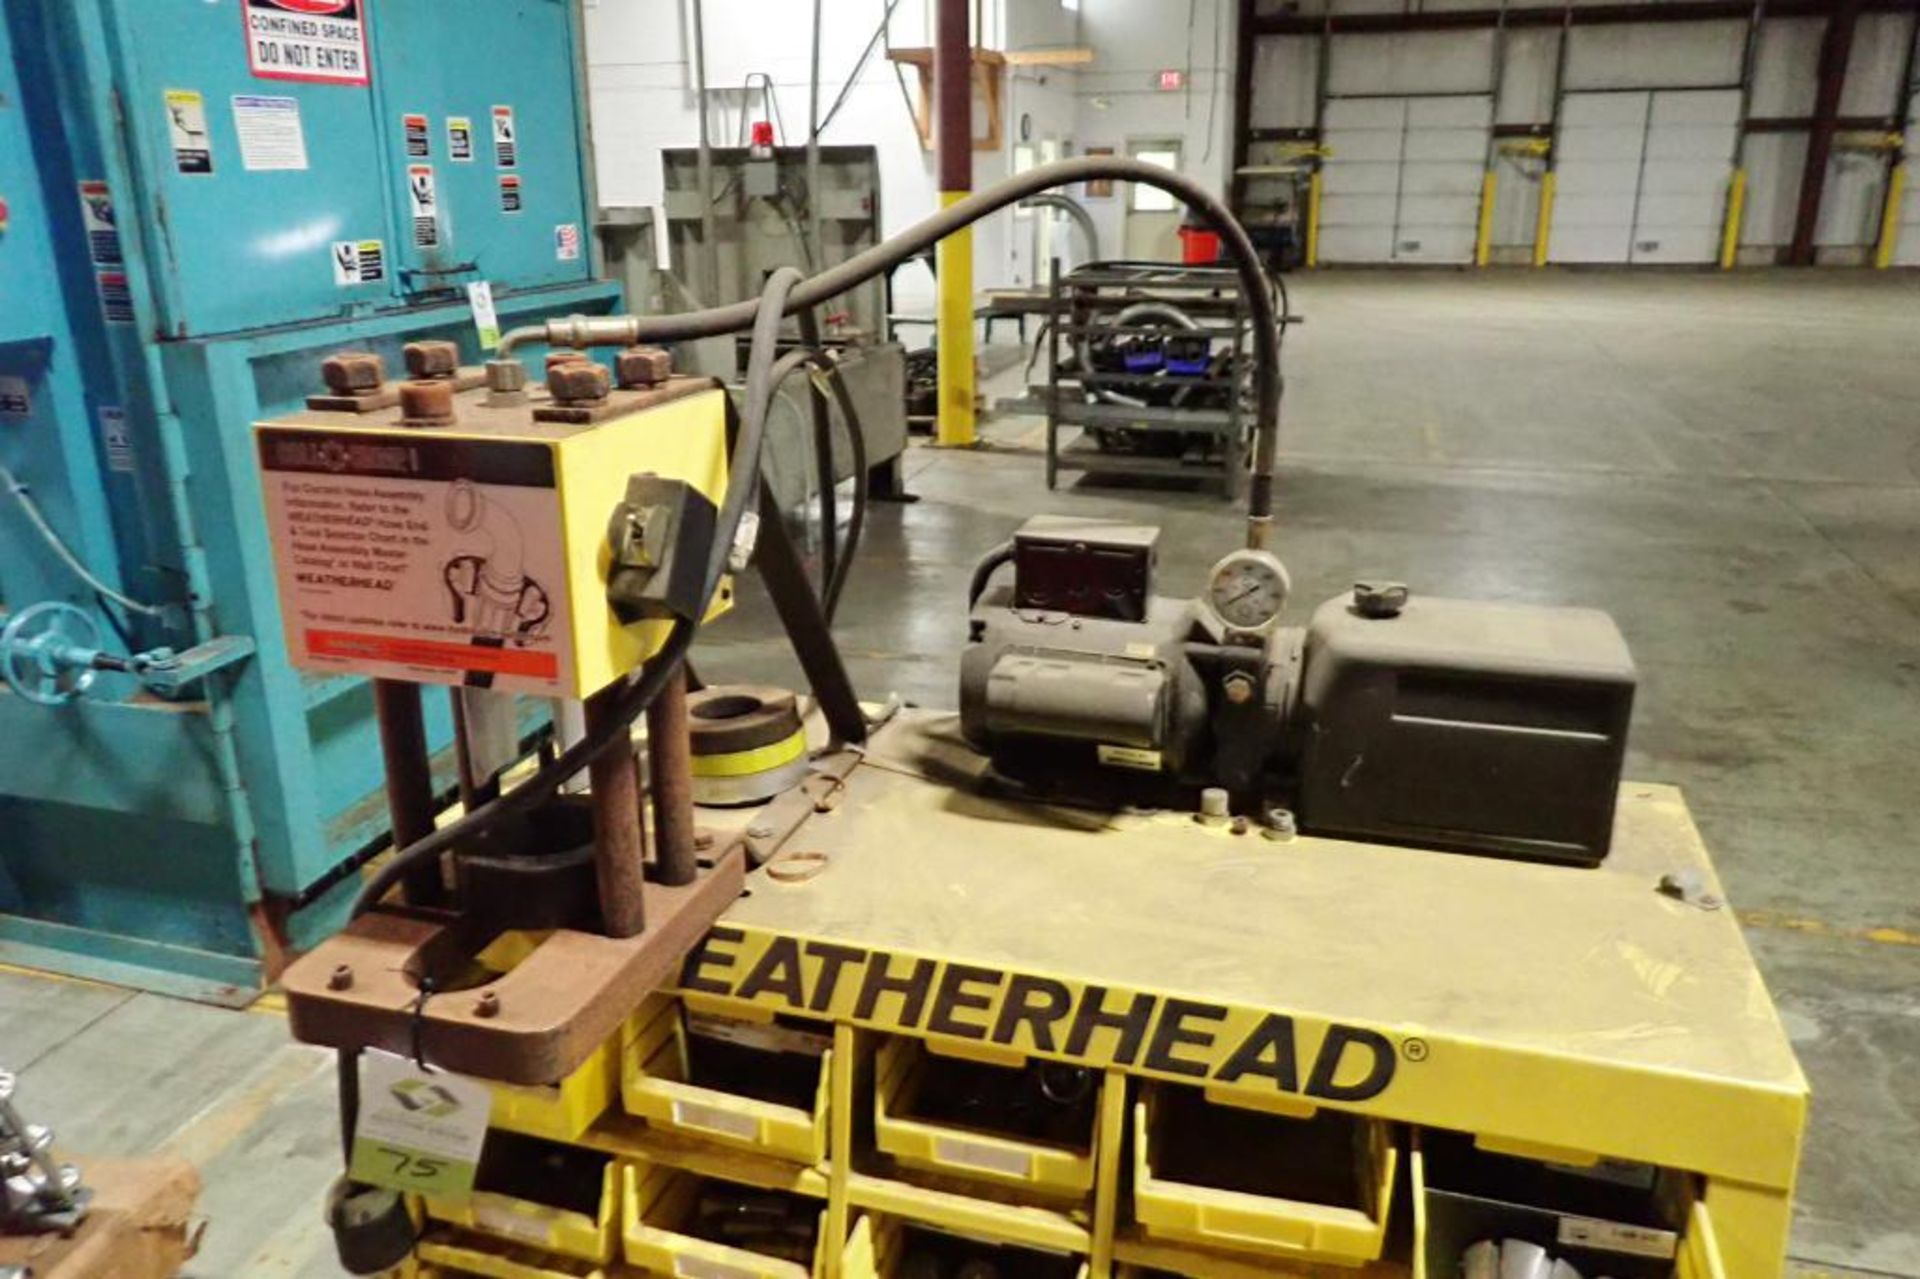 Weatherhead hose assembly station {Located in Plymouth, IN} - Image 3 of 9